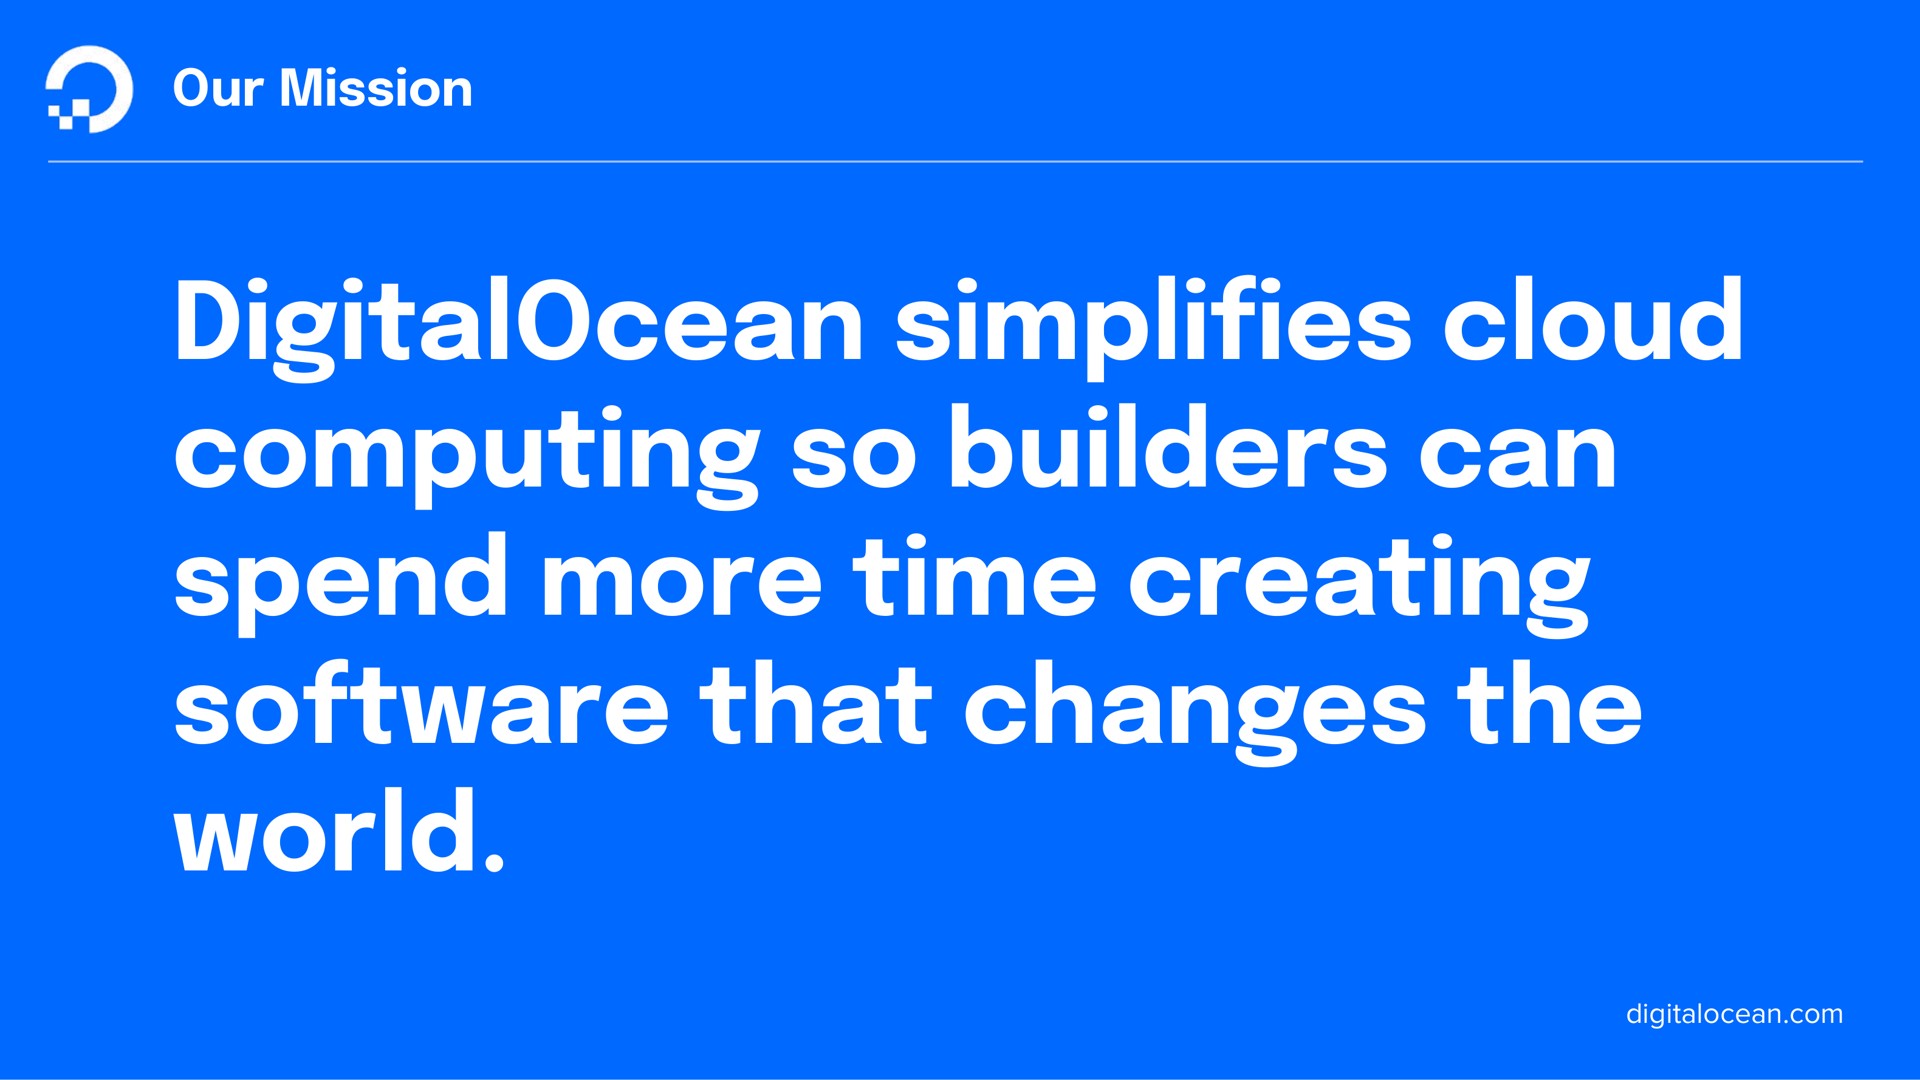 our mission cloud computing so builders can spend more time creating that changes the world simplifies | DigitalOcean